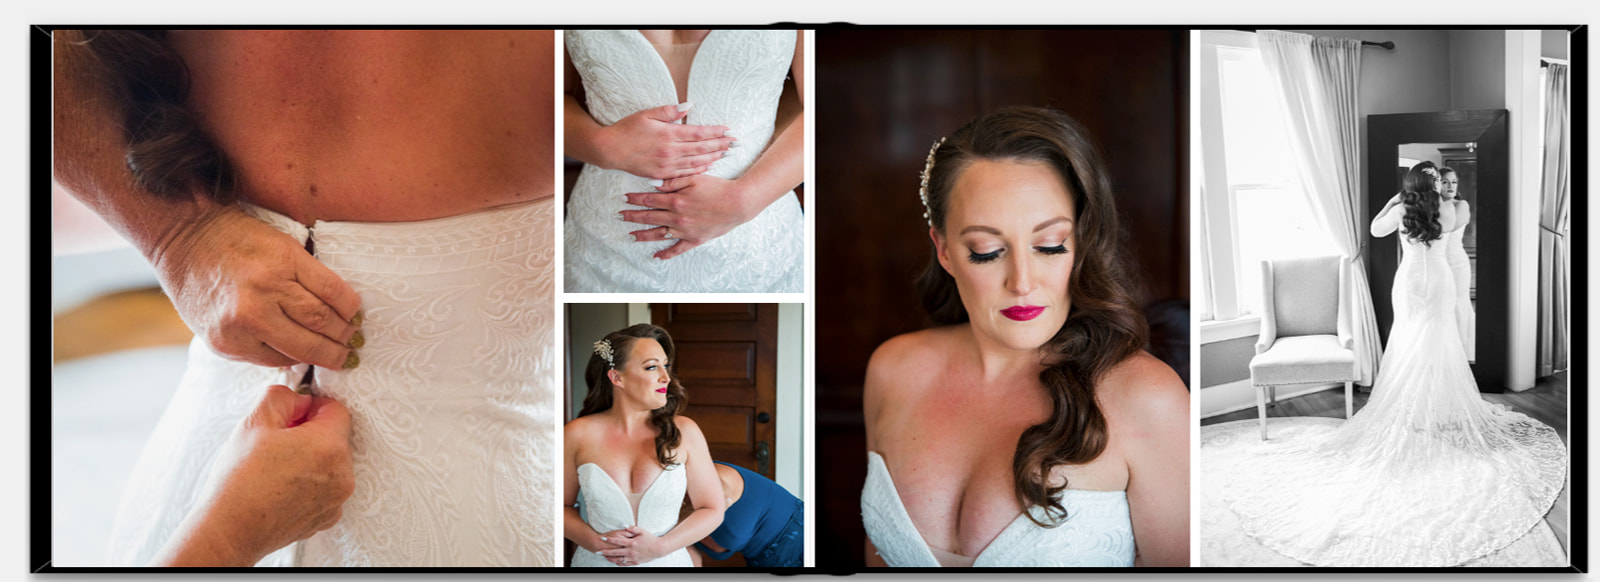 A preview of the inside spread of a wedding album featuring a bride getting ready on her wedding day.